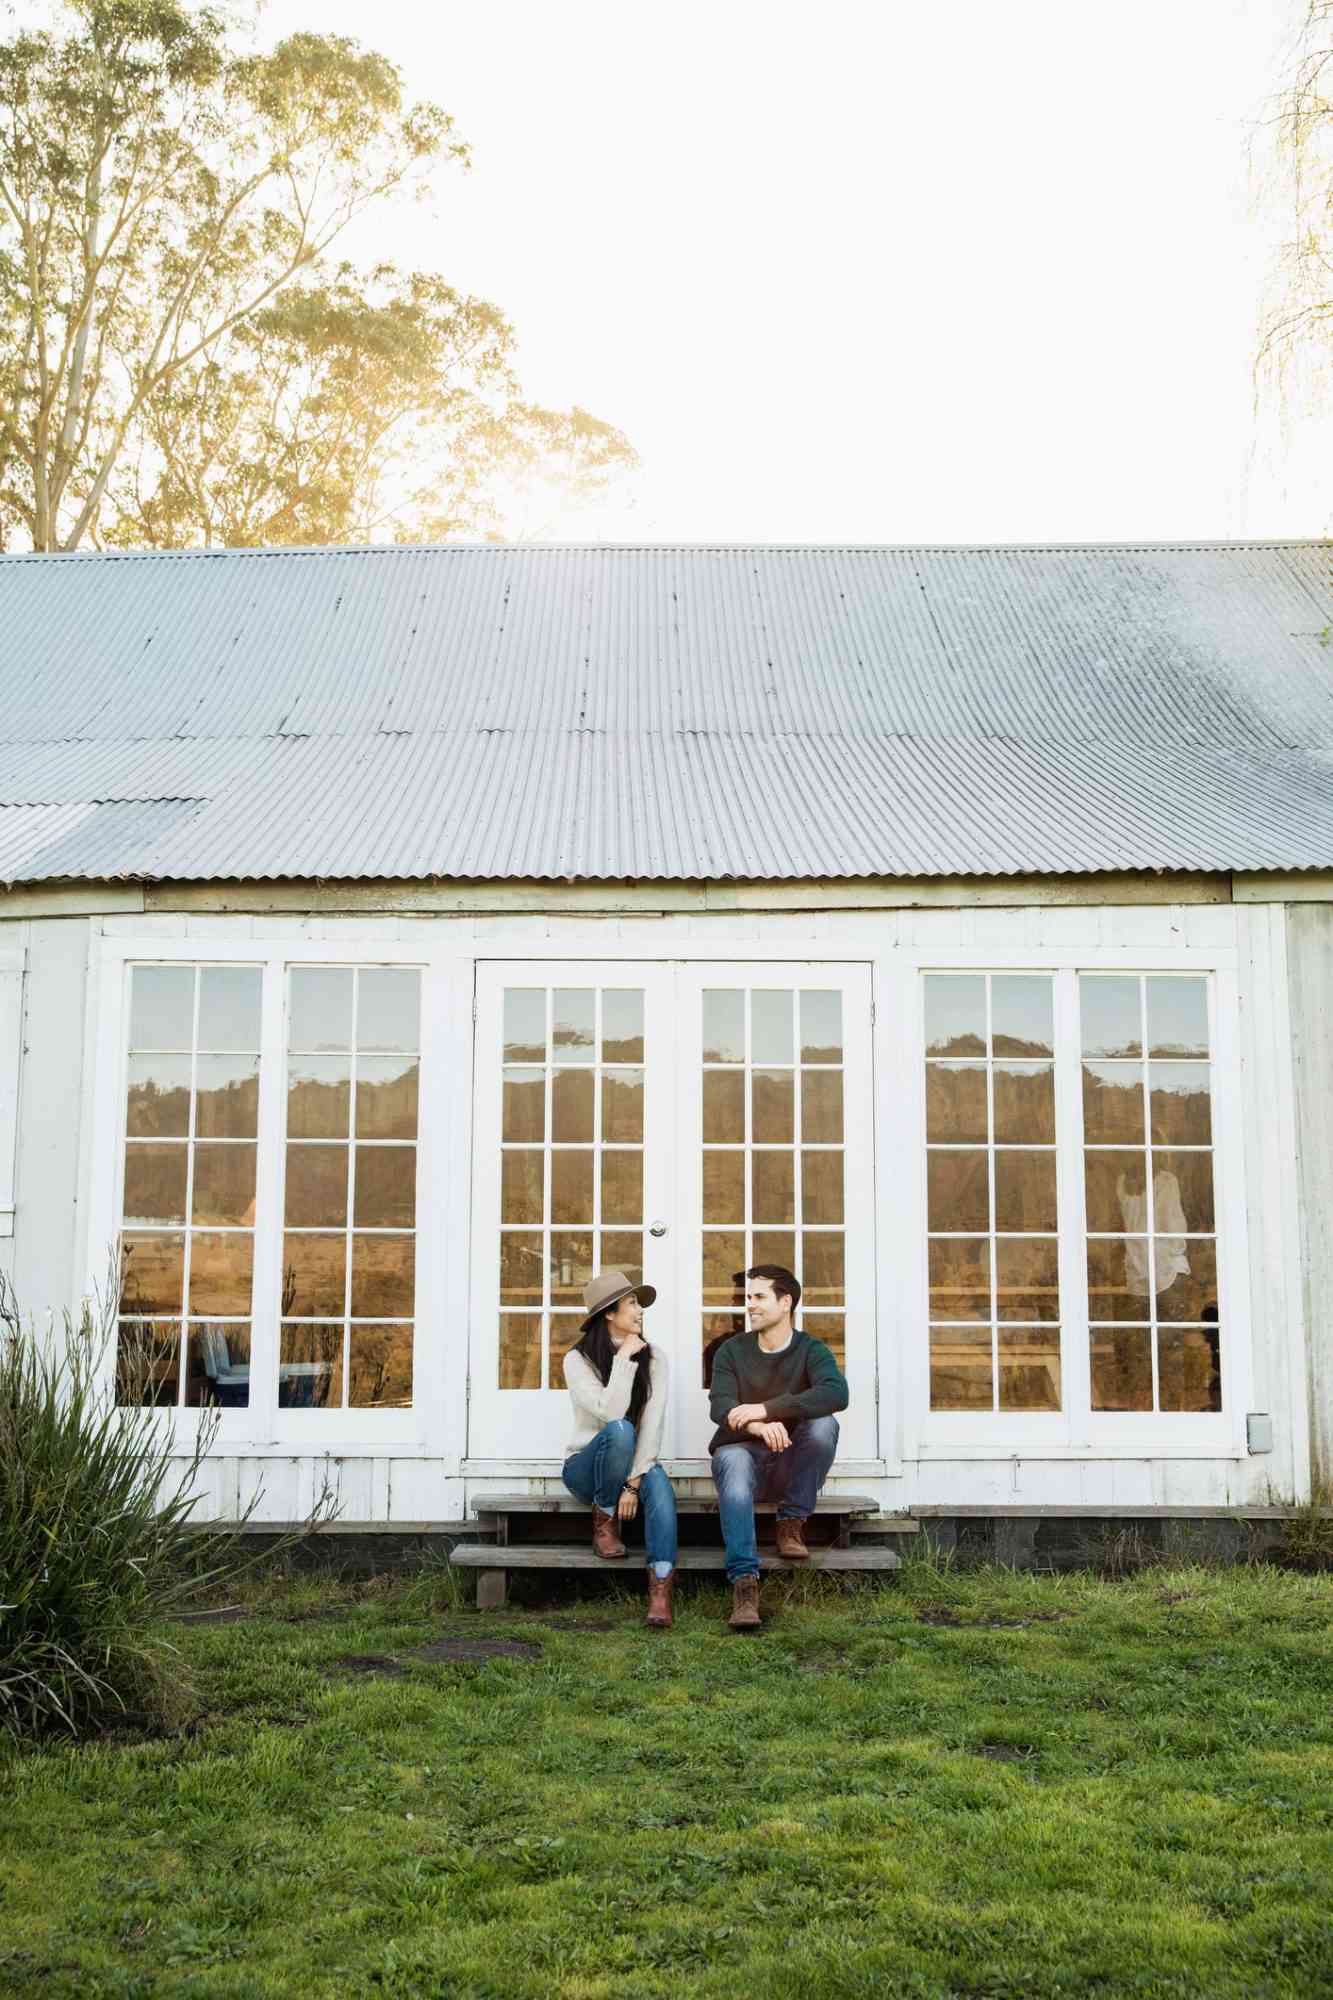 Couple sitting on the porch of their country house